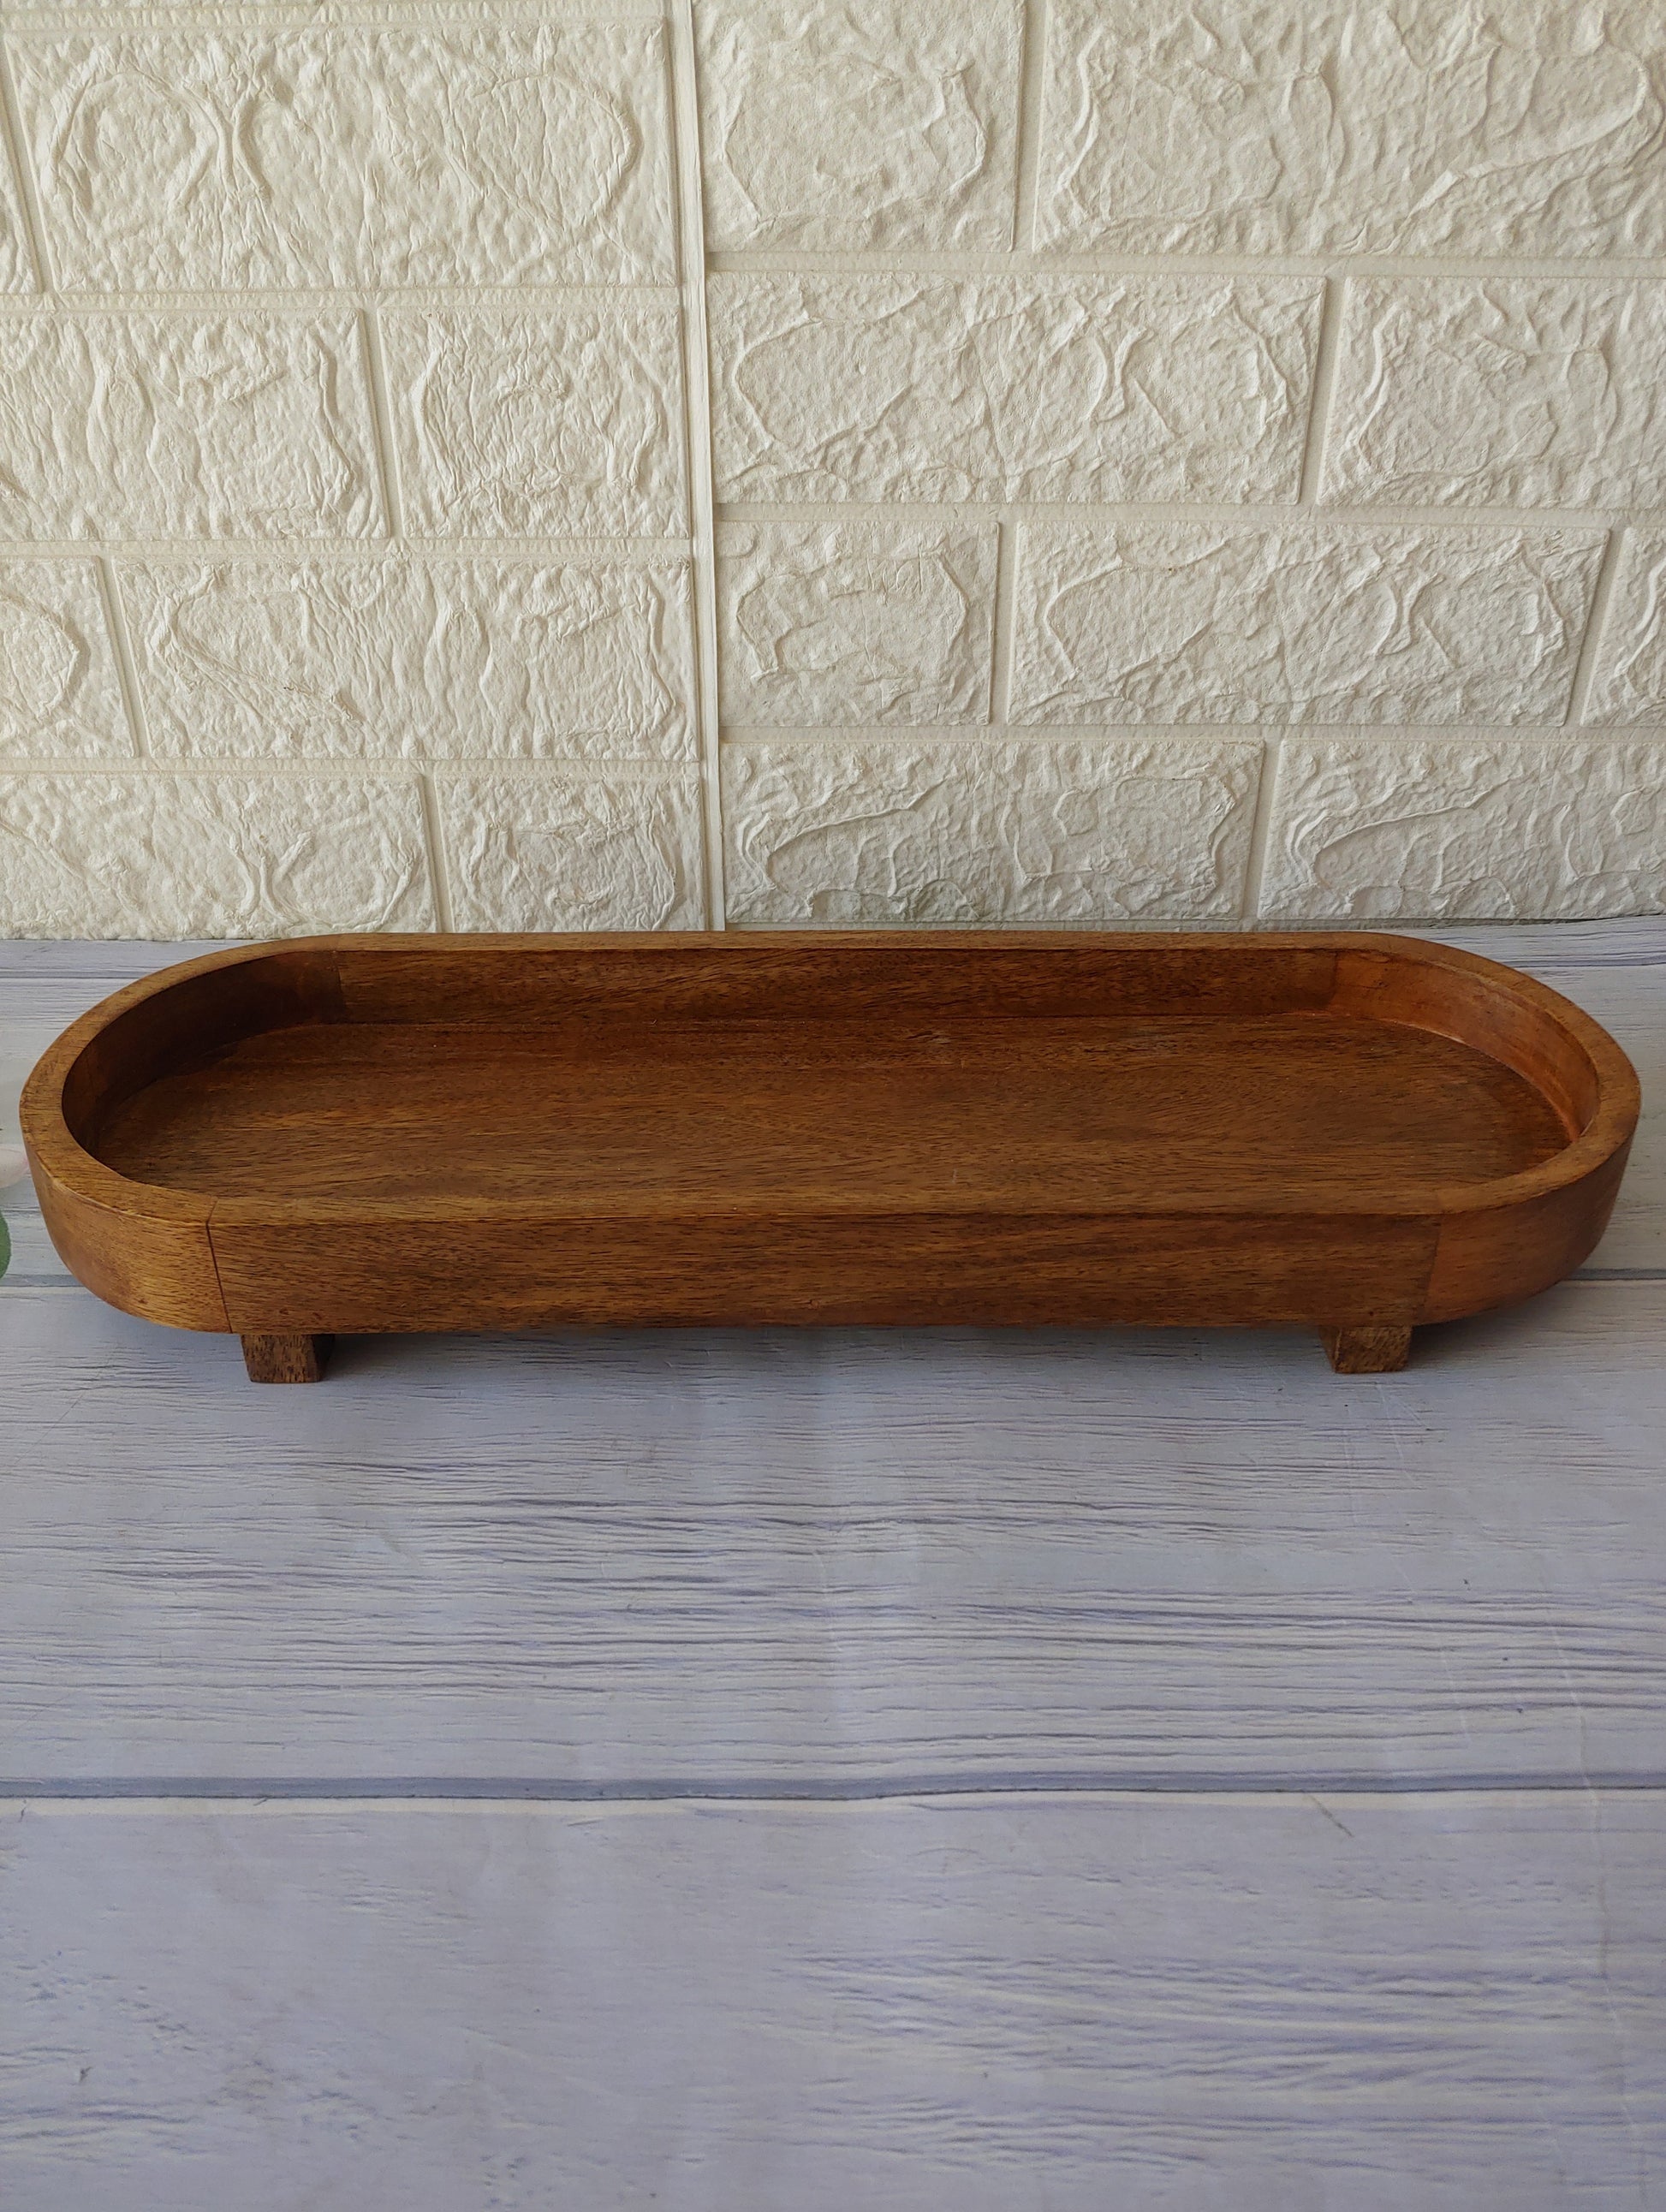 Wooden  Decorative  single Tray  ,18 inches